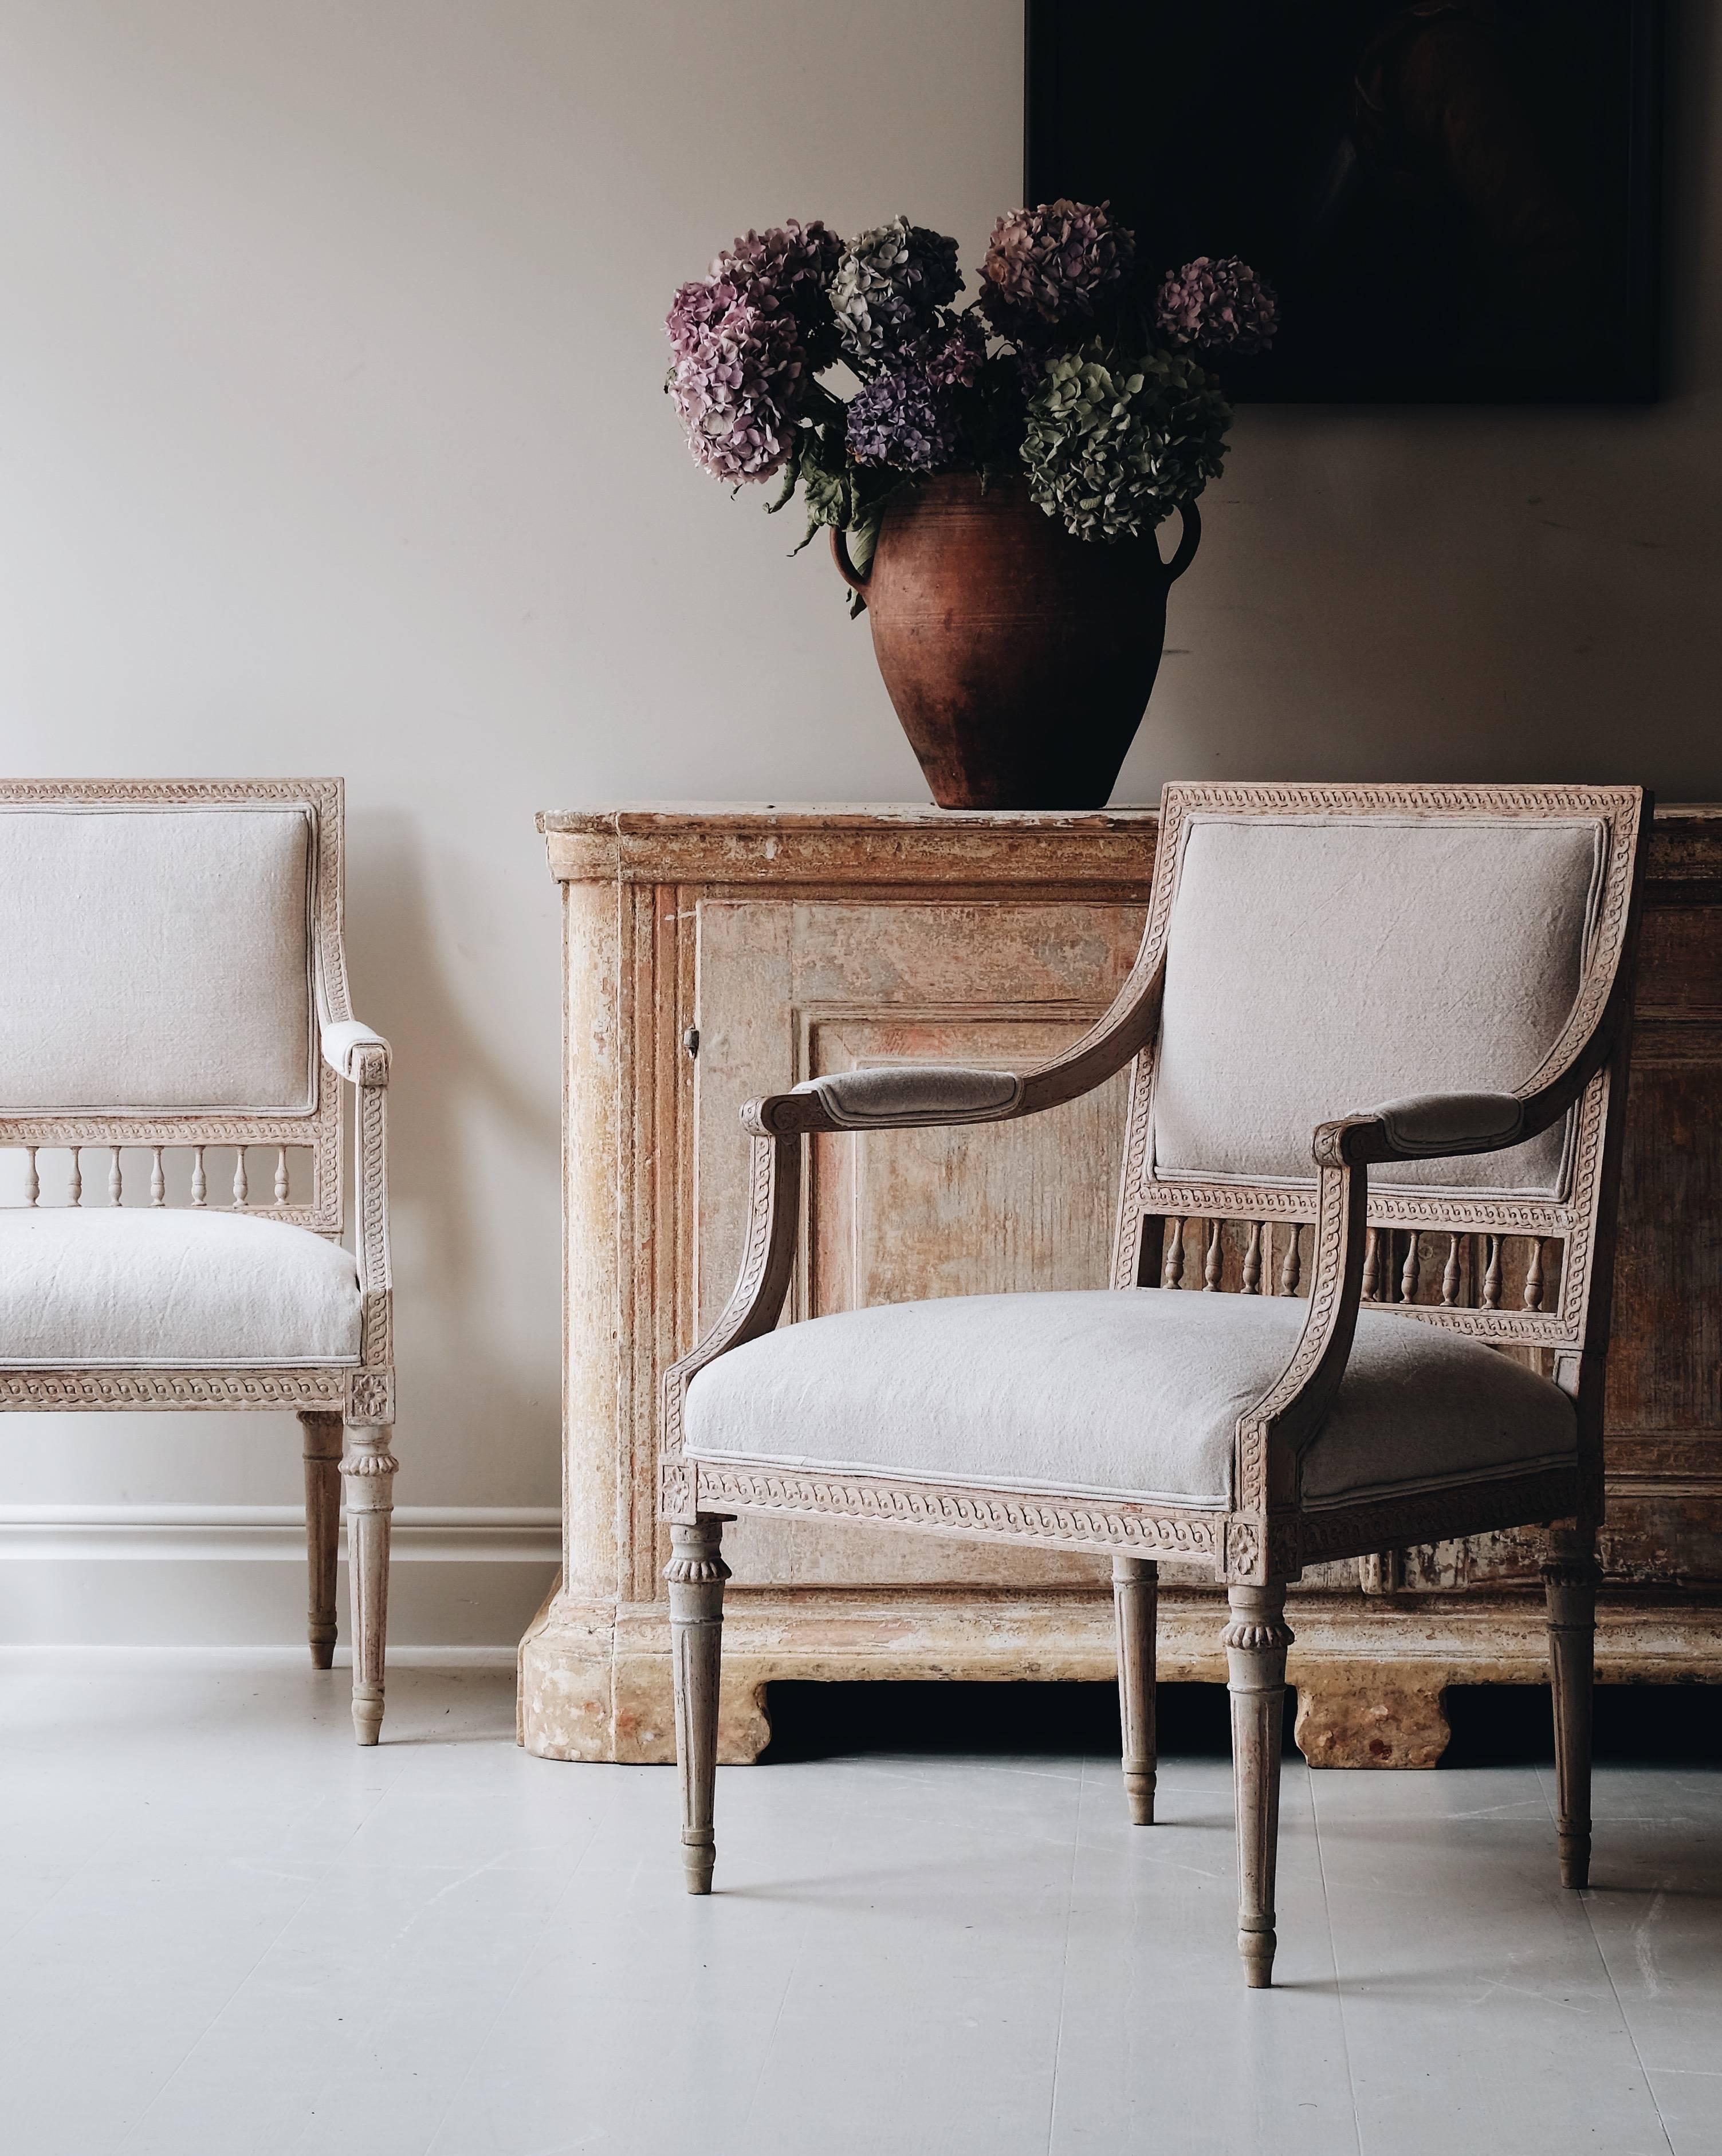 Exceptional pair of 18th century Swedish Gustavian armchairs in original color with fine guilloche carvings and proportions, circa 1790, Sweden.



